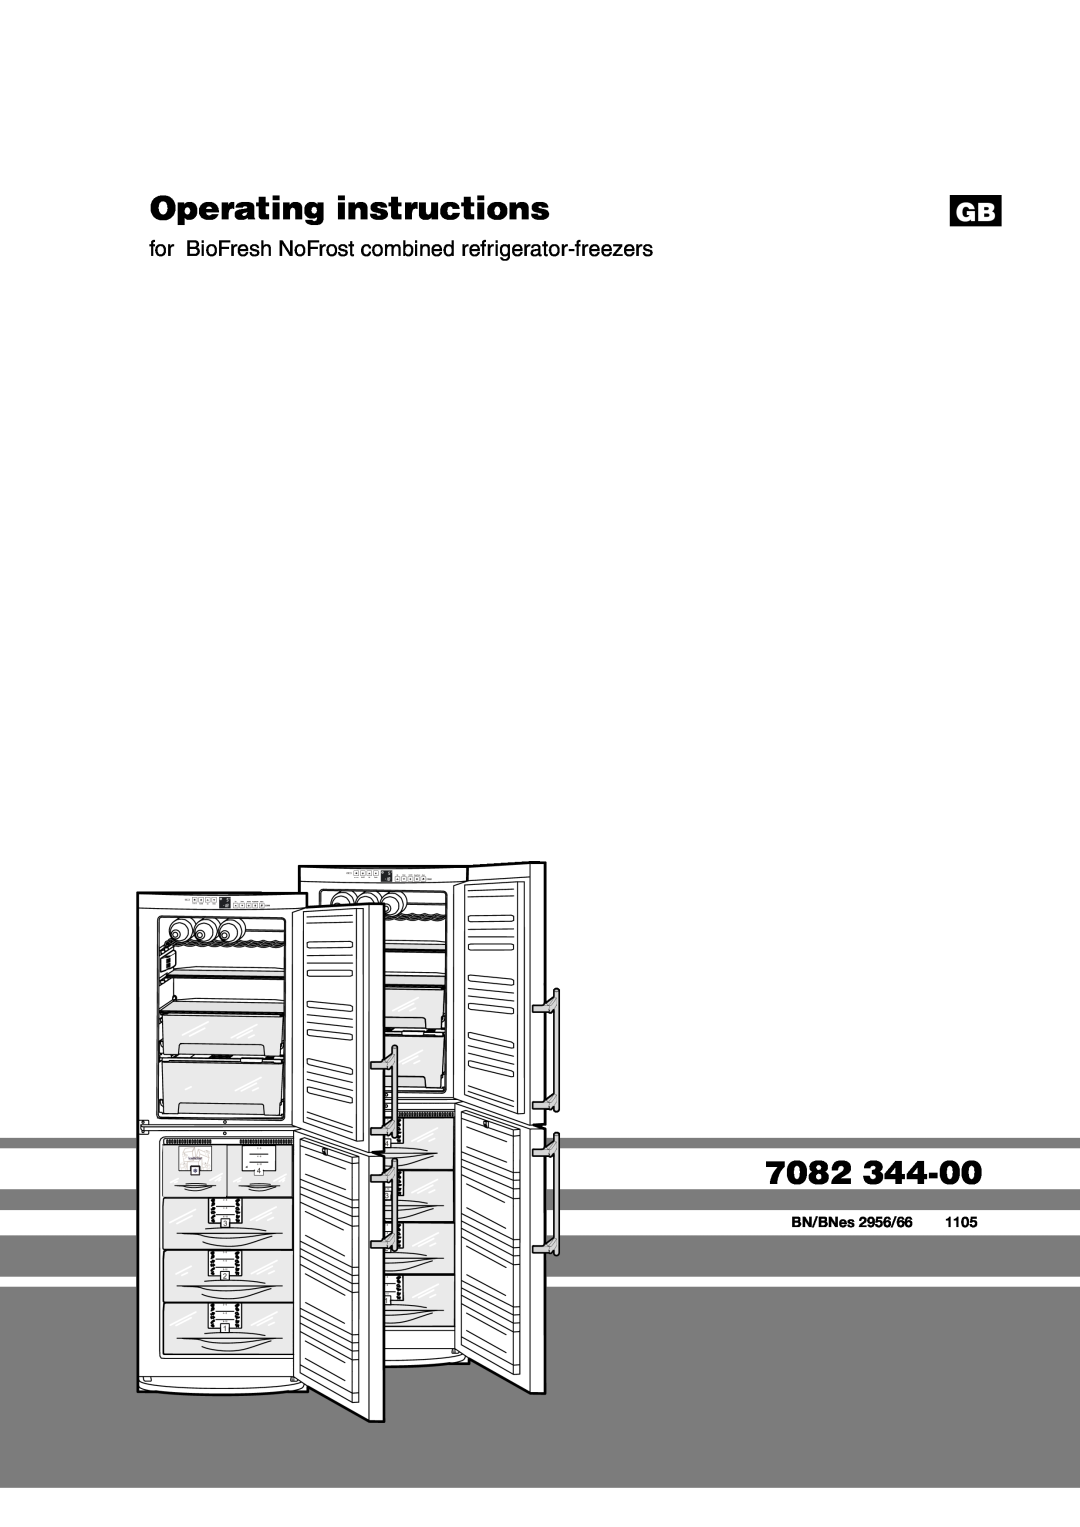 Liebherr 7082 218-03 Operating instructions, for BioFresh NoFrost combined refrigerator-freezers, BN/BNes 2956/66, 1105 